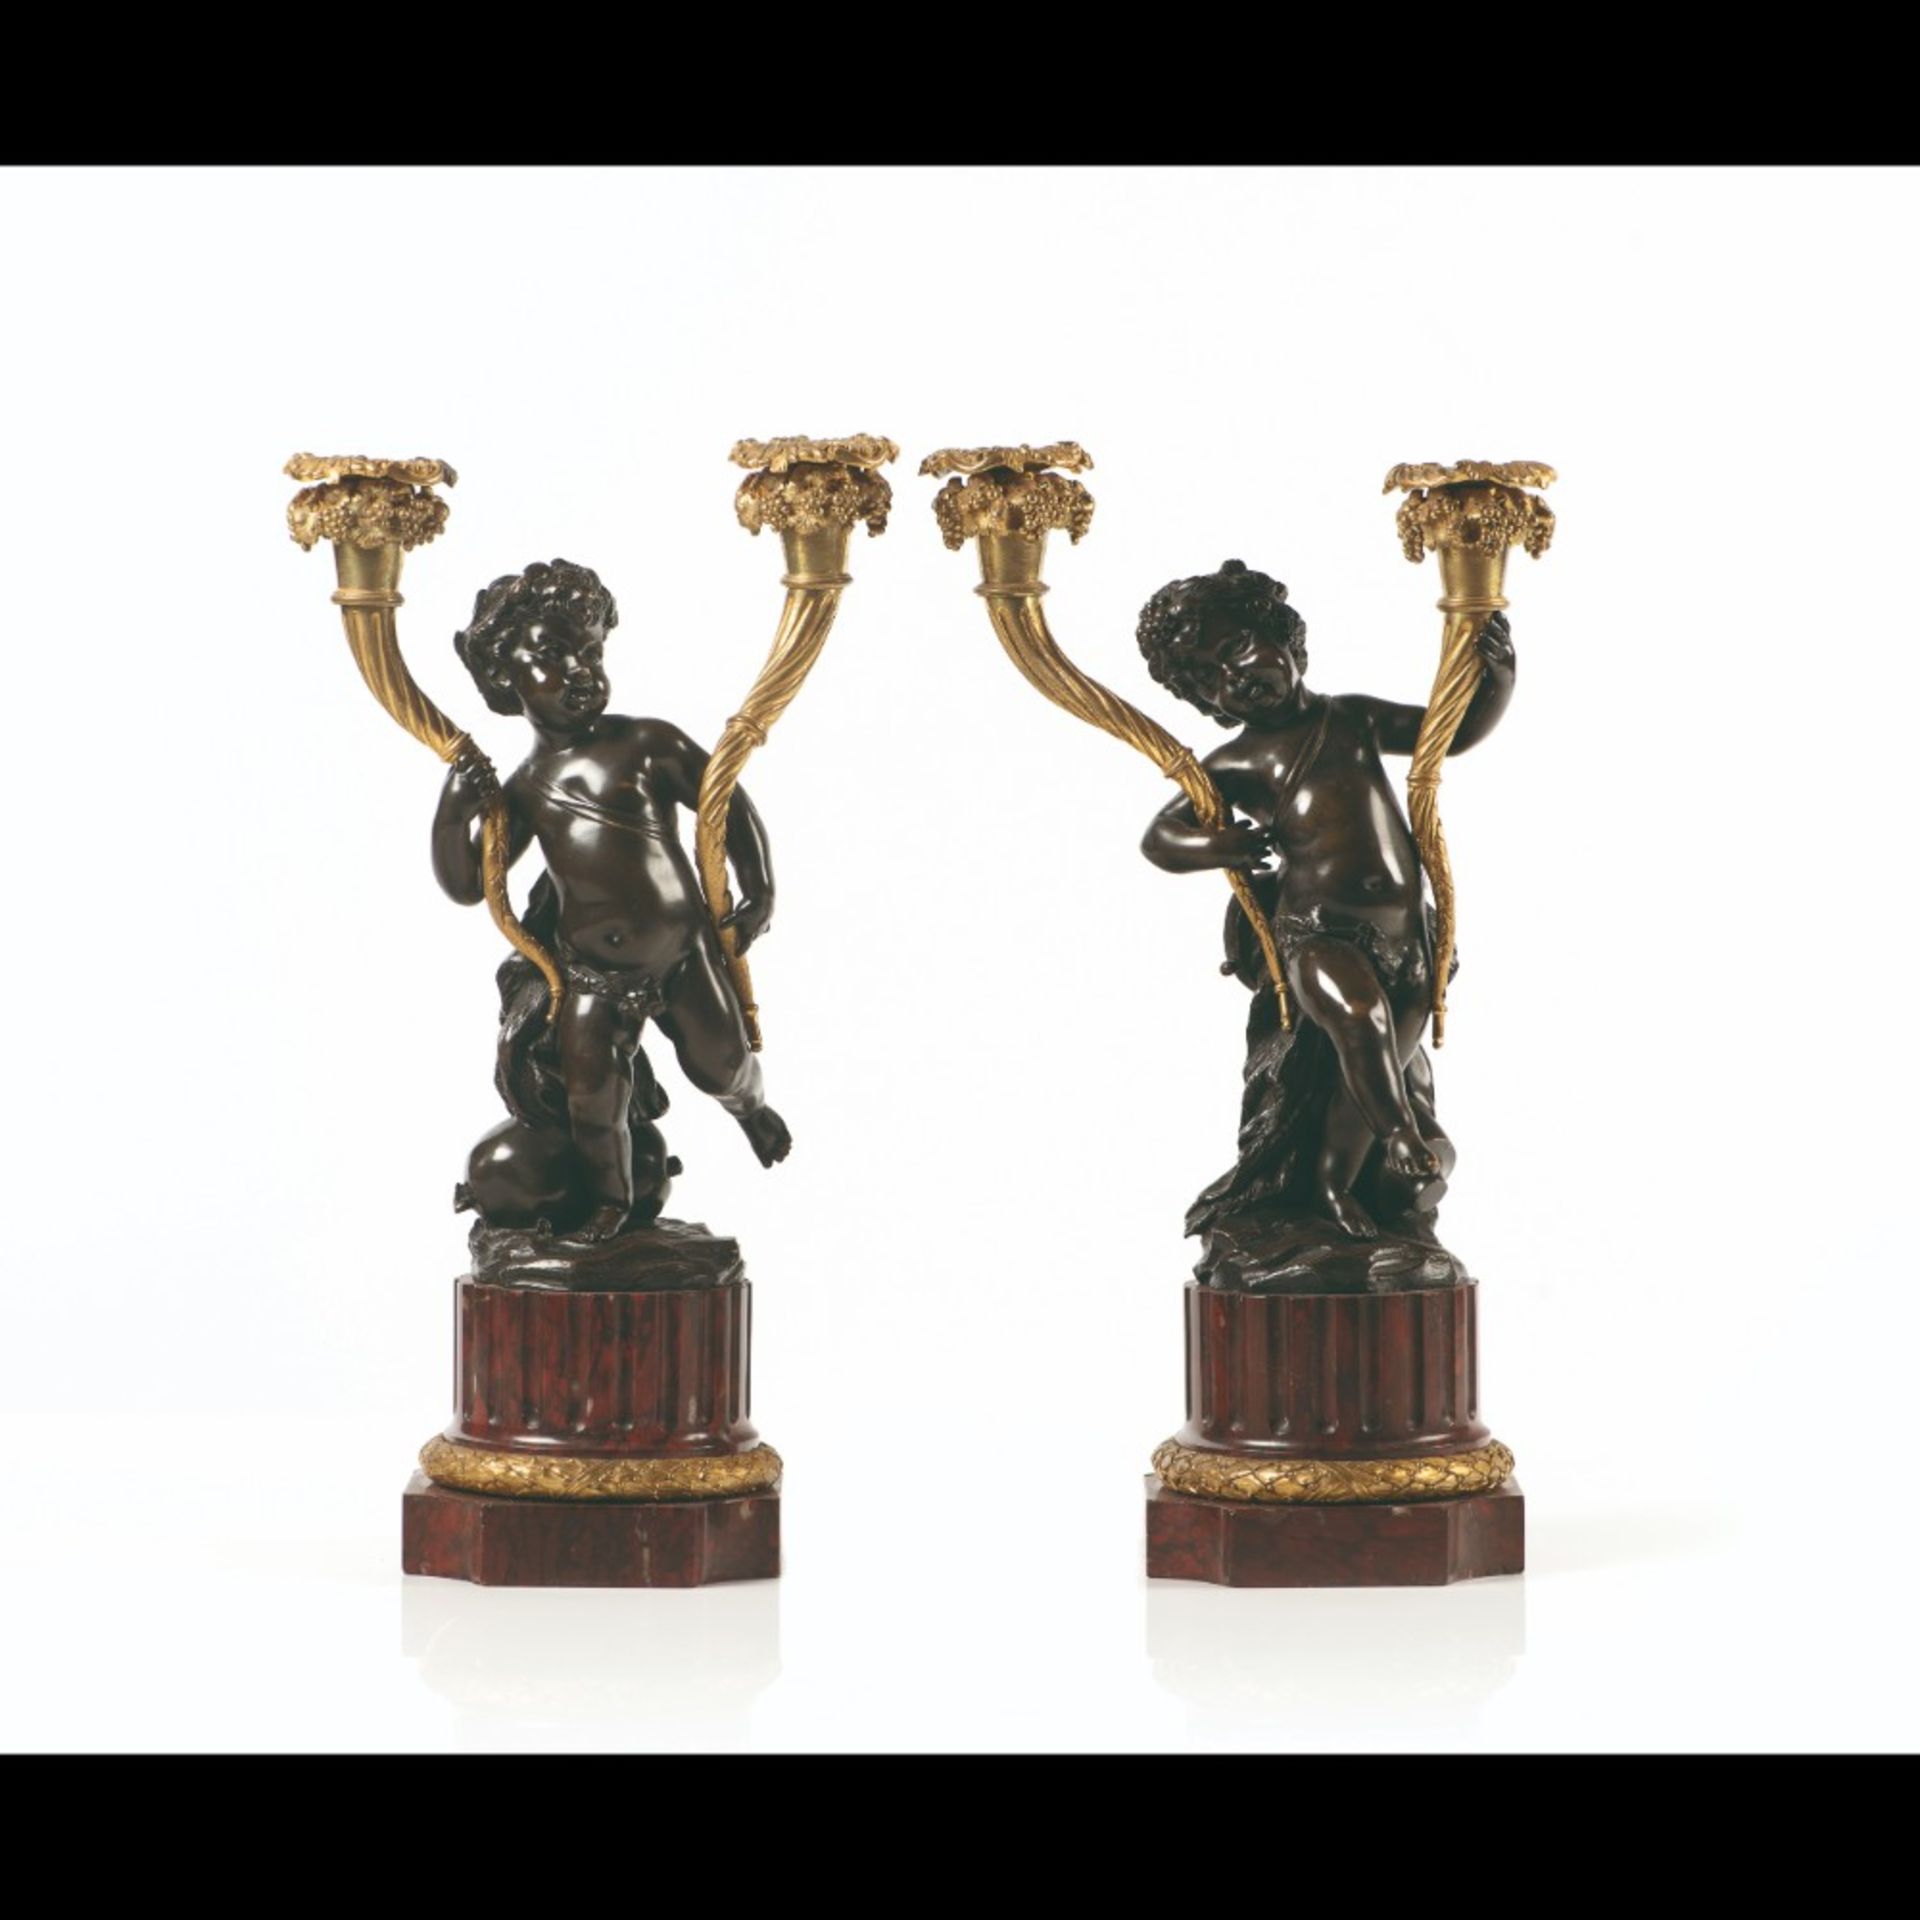  A pair of Louis XVI style two-light candelabra